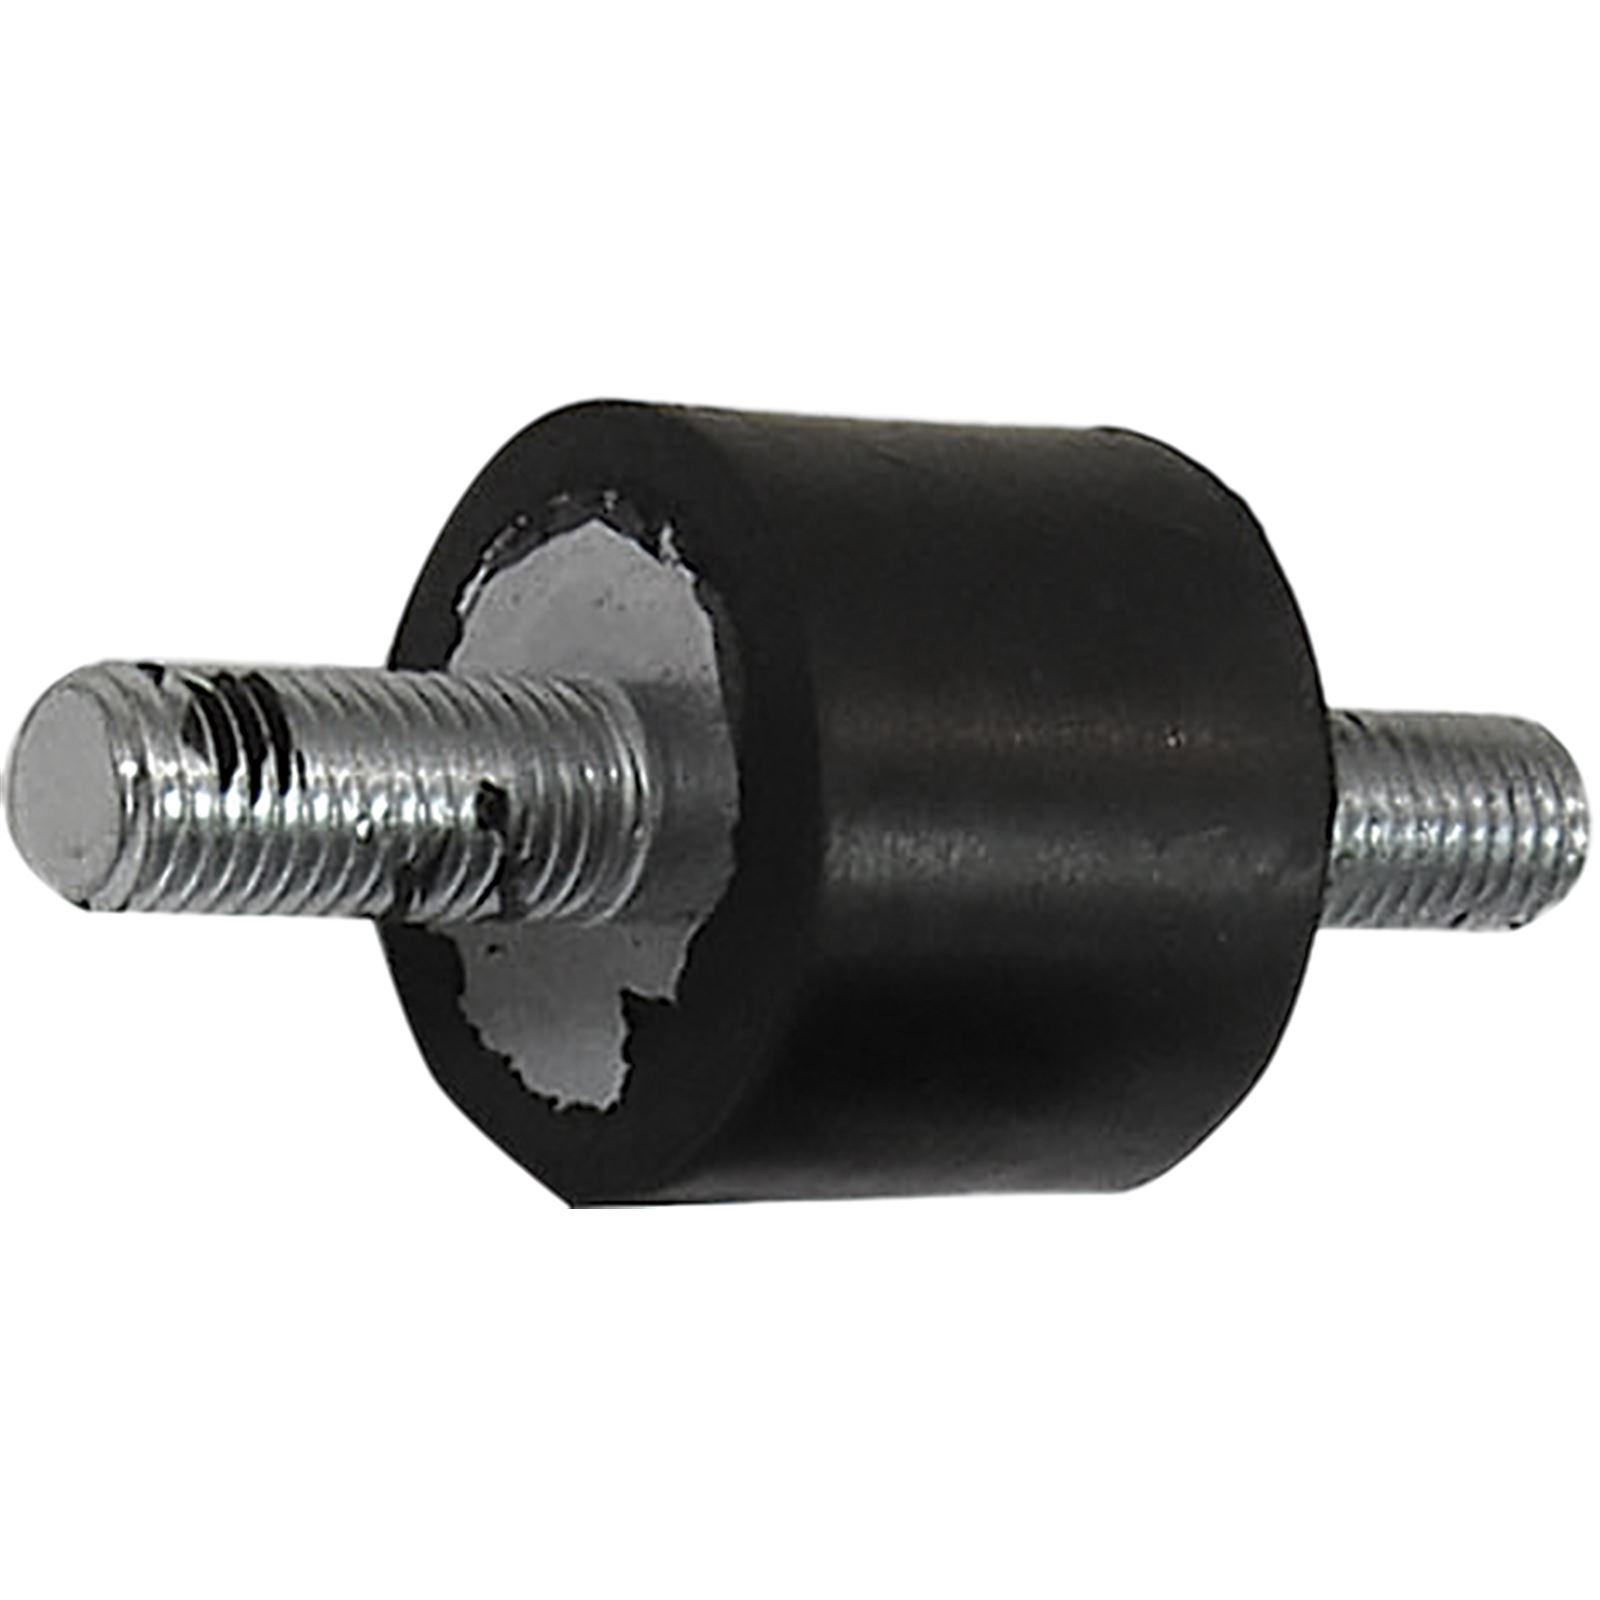 Harddrive Rubber Mounting Stud